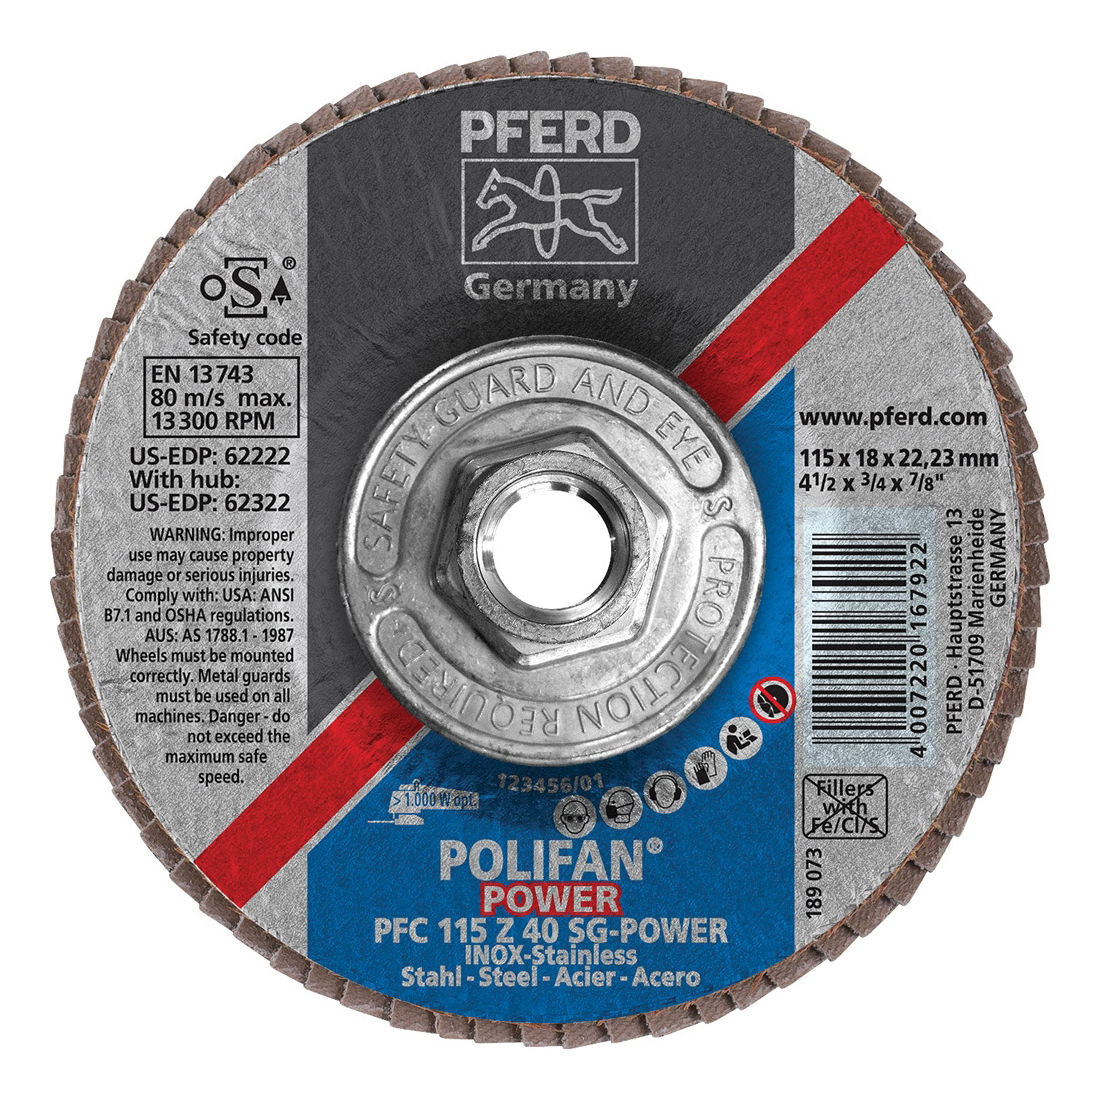 PFERD Polifan® 62322 Performance Line SG Z-Power Threaded Coated Abrasive Flap Disc, 4-1/2 in Dia, 40 Grit, Zirconia Alumina Abrasive, Type 29 Conical Disc